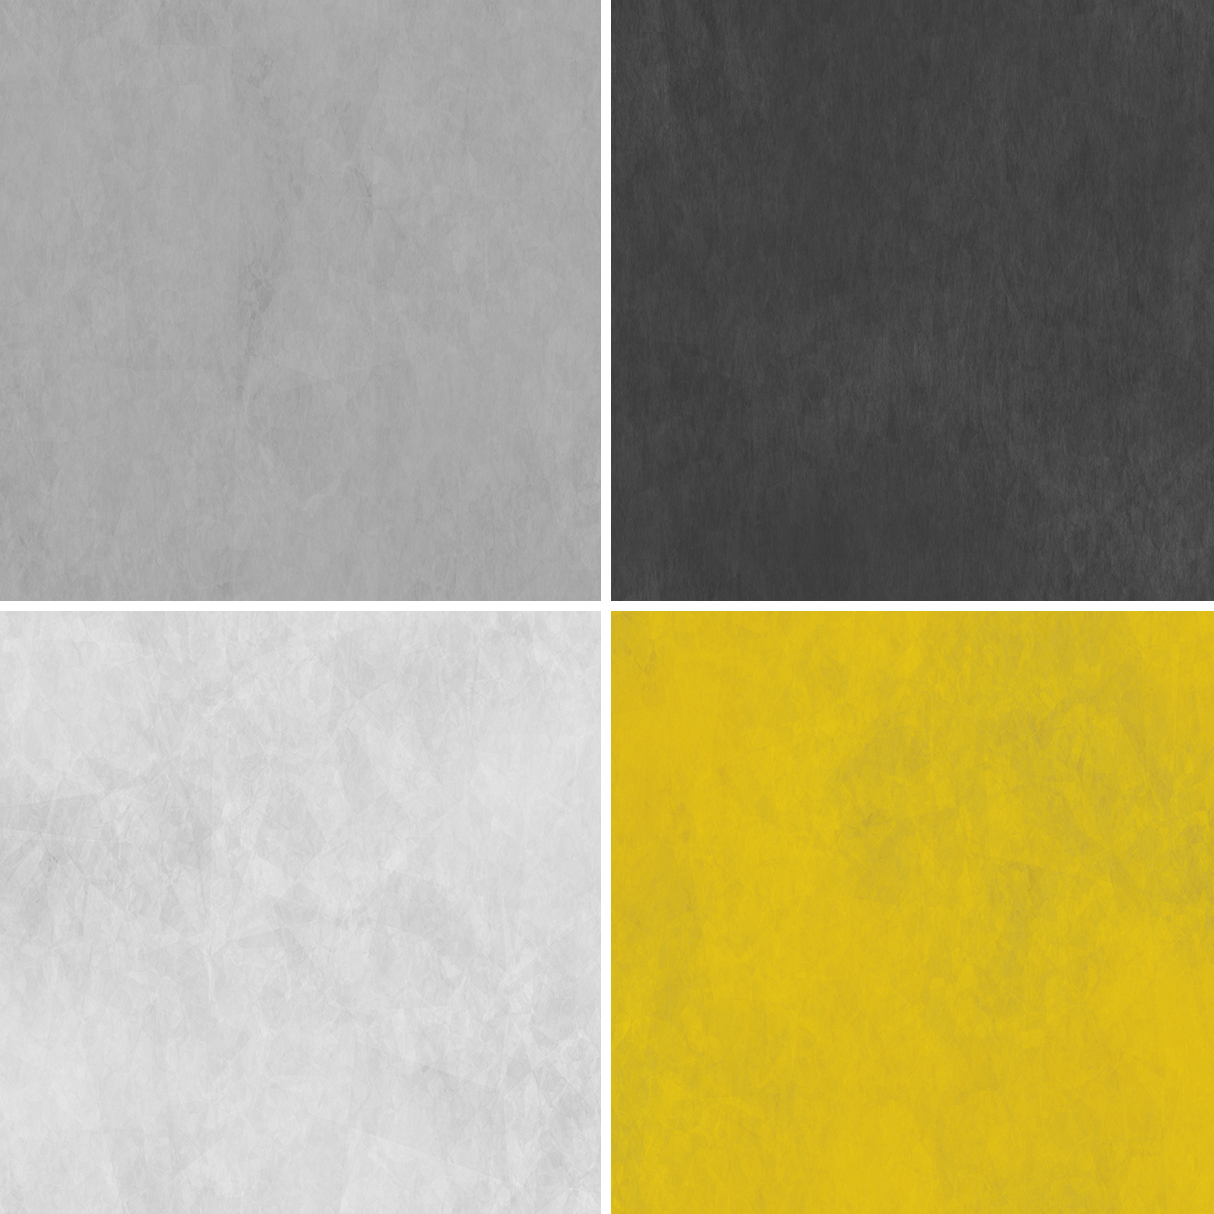 30 Suede Background Textures Samples – Part 6